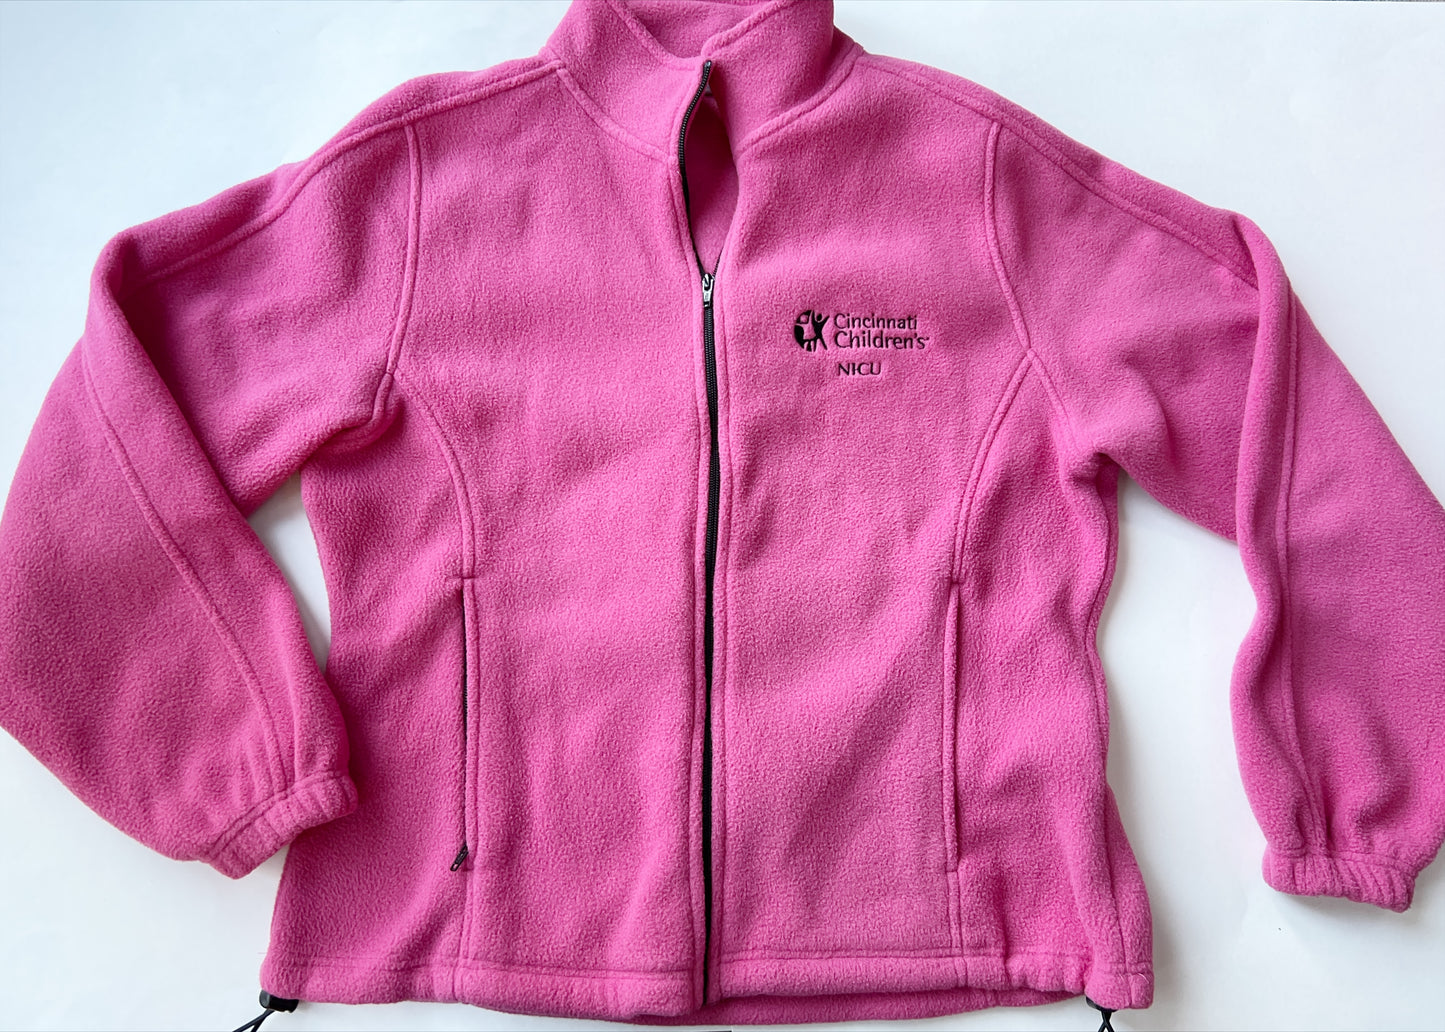 Cincinnati Children’s NICU pink fleece zip-up (old logo), size is ‘Ladies large,’ zippered pockets and drawstrings at the waist for adjustable fit, VGUC (worn once or twice)